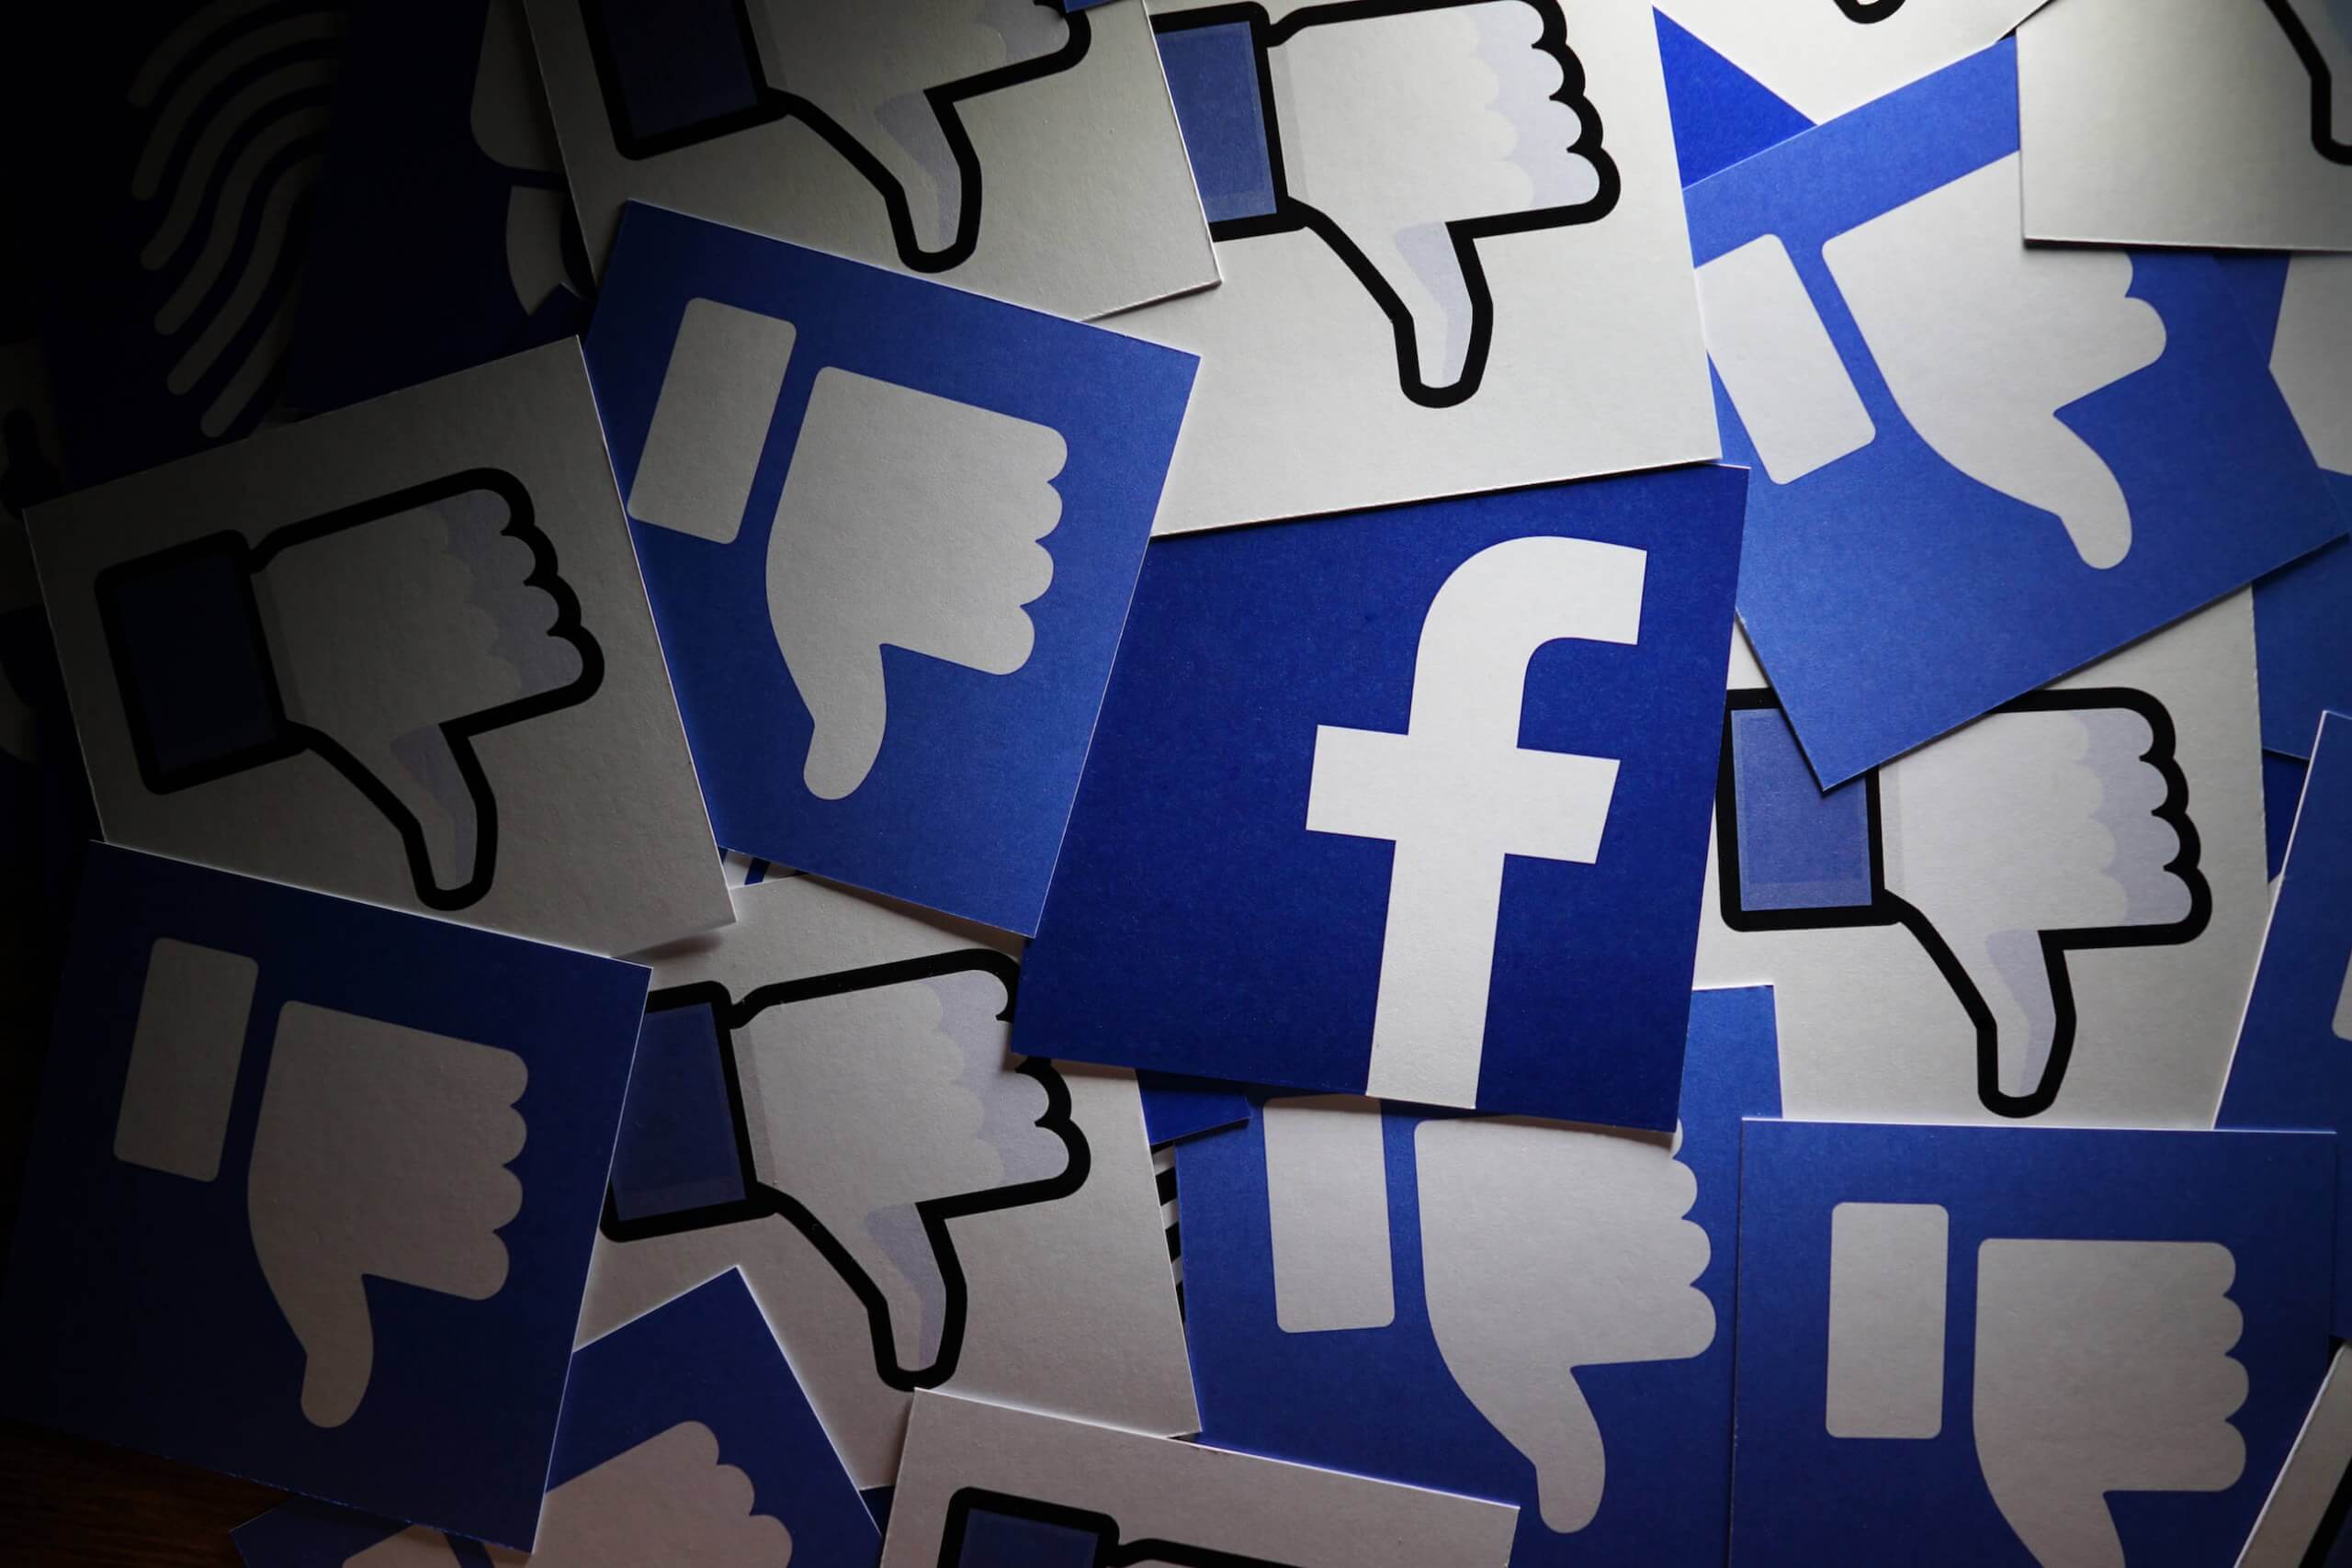 Senators not happy over reported $5 billion Facebook agreement with the FTC